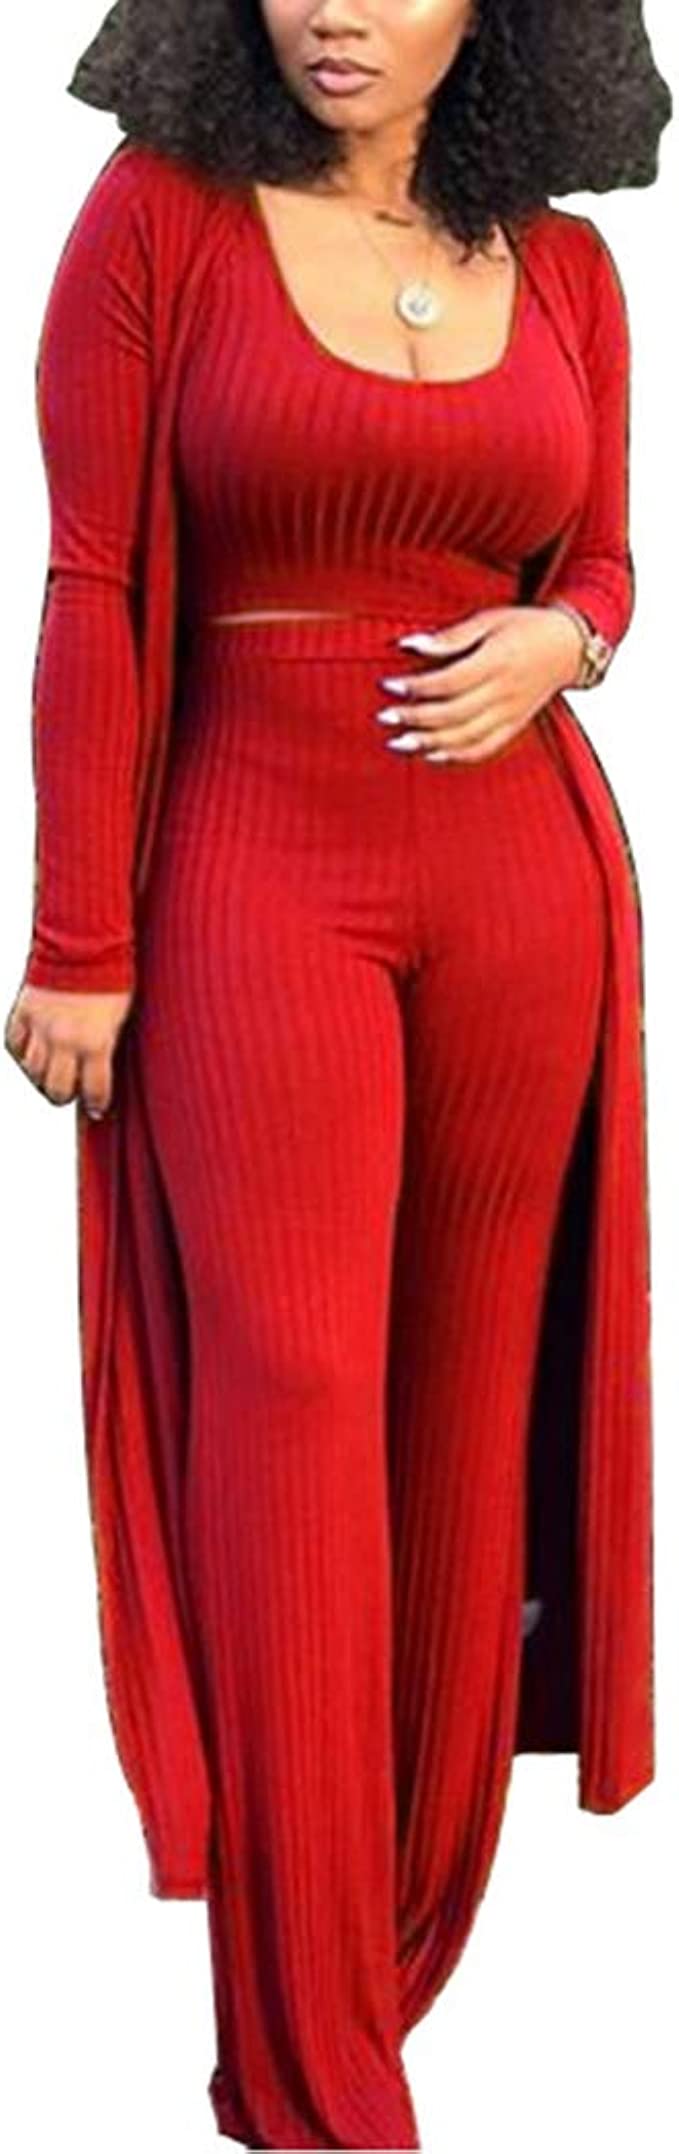 Women's Tracksuit Winter Autumn Knitted Long-sleeved Blazer Coat Tank Long Pants Three Piece Sets Outfit - Red